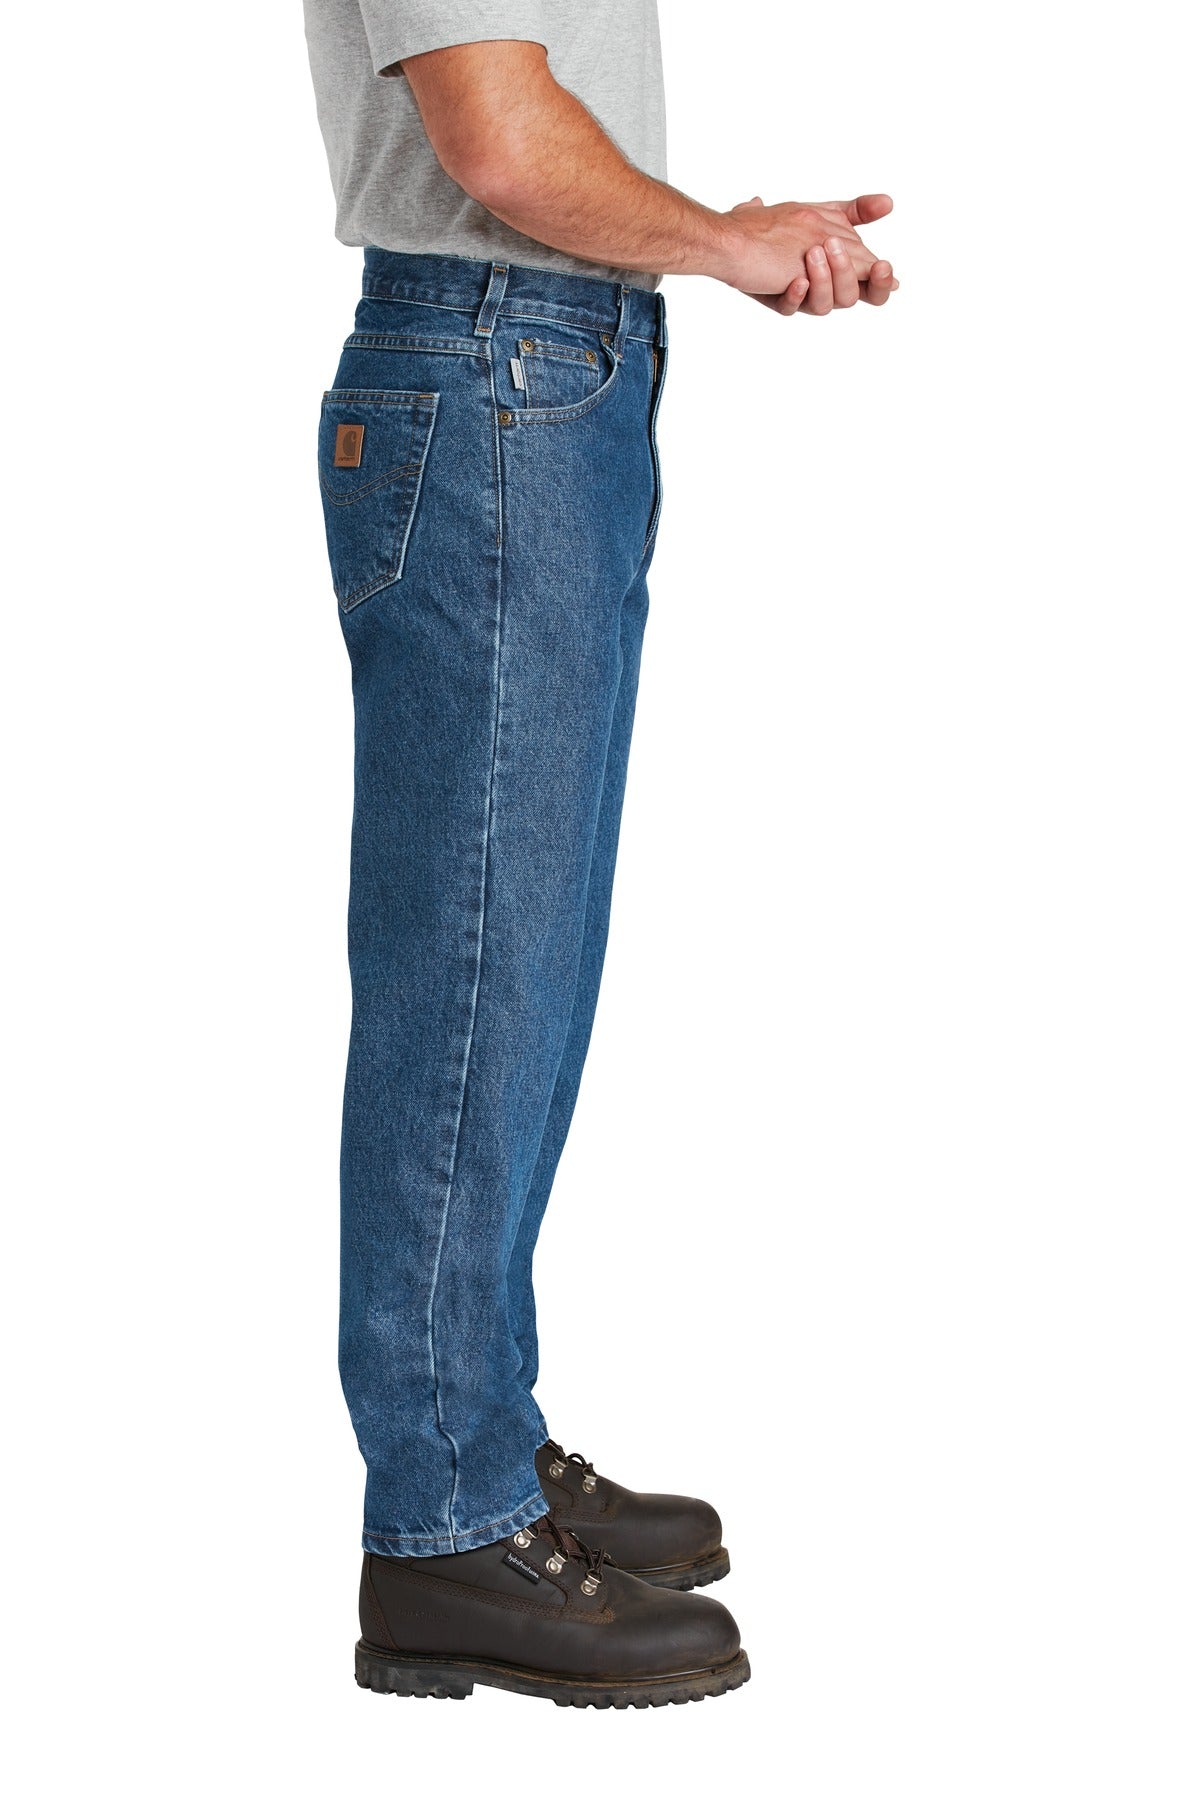 DISCONTINUED Carhartt ® Relaxed-Fit Tapered-Leg Jean . CTB17 - DFW Impression